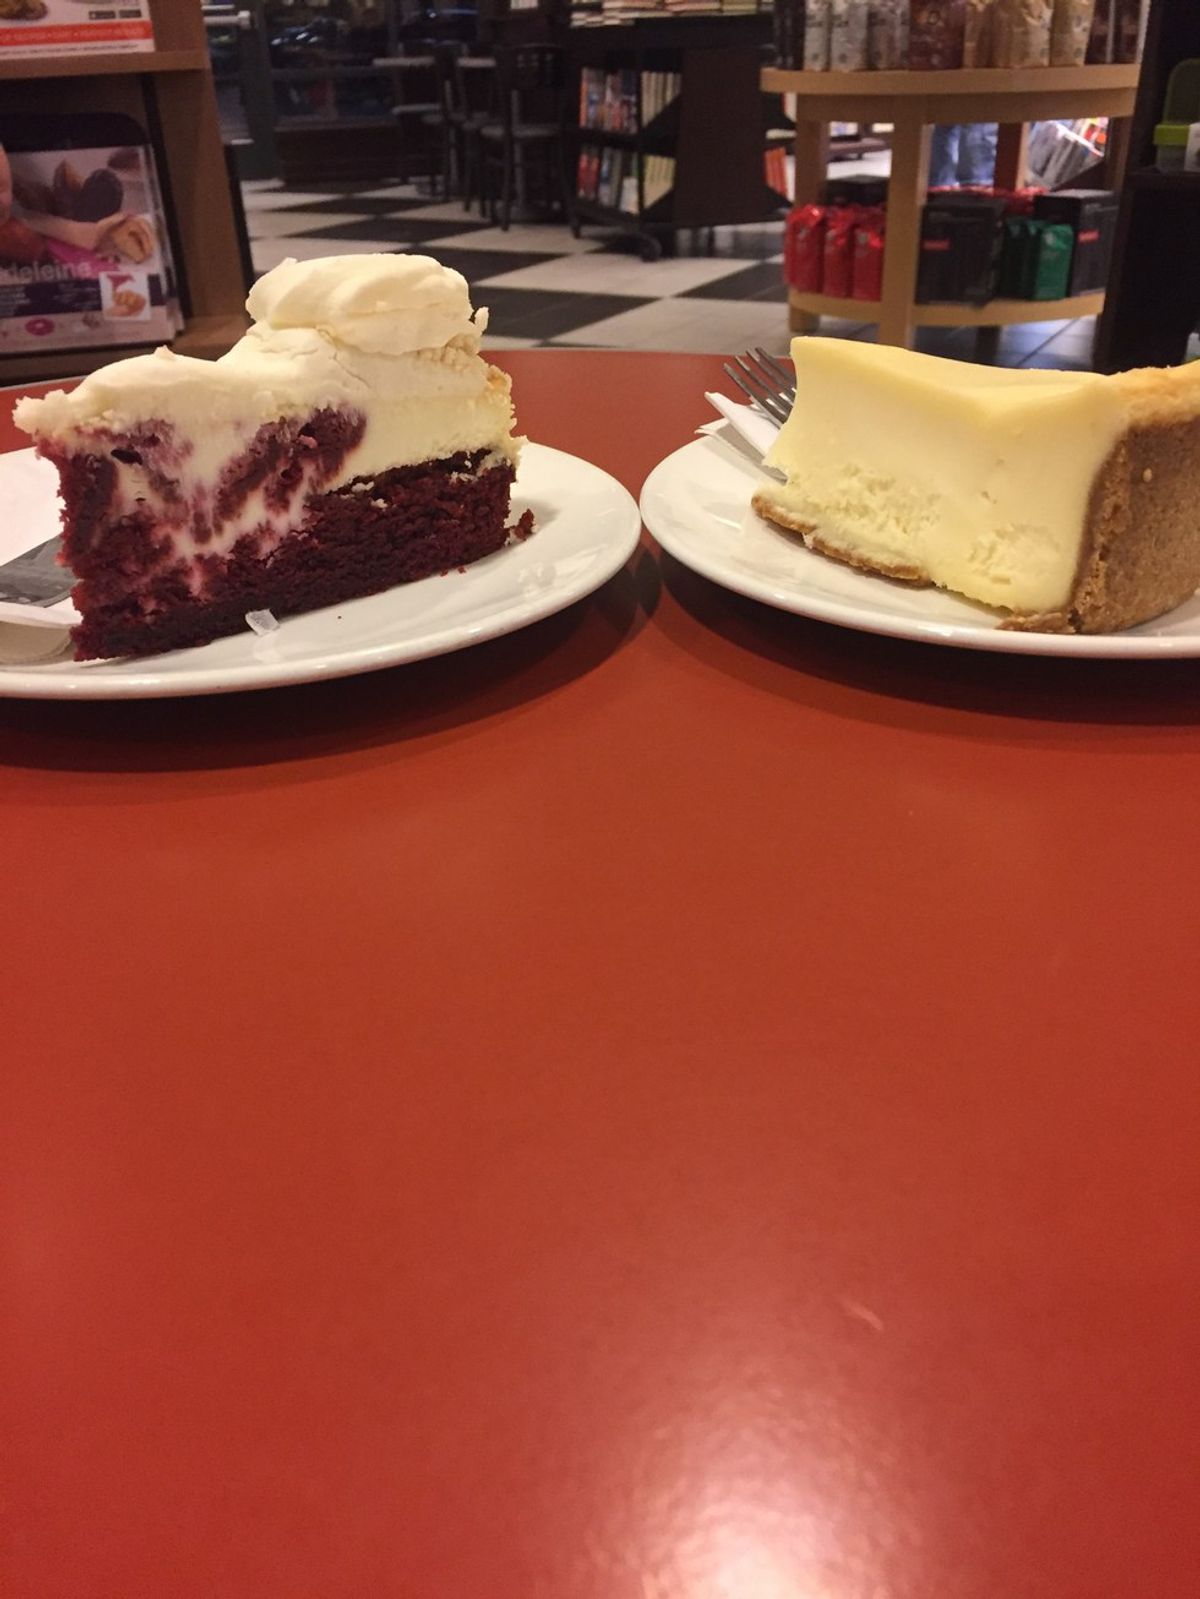 An Introduction To The 'Cheesecake Wednesday' Tradition